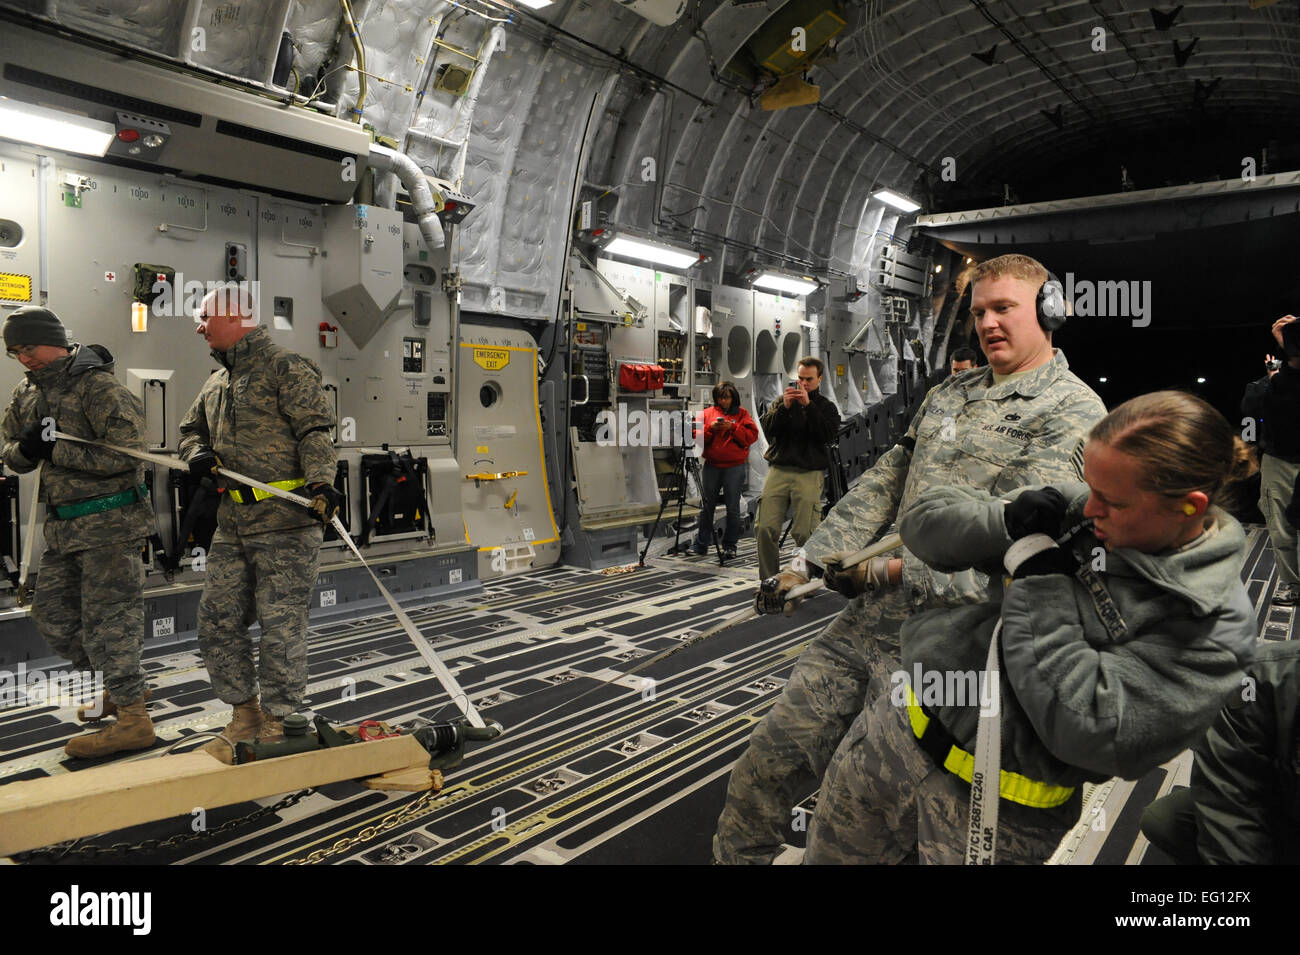 Members of the 305th Aerial Port Squadron load a mobile command and control unit onto C-17 Joint Base McGuire-Dix-Lakehurst AFB, New Jersey Jan. 15, 2010. Air Mobility Command is responding with all necessary forces and equipment to aide the humanitarian efforts in Haiti. Senior Airman Katie Gieratz Stock Photo